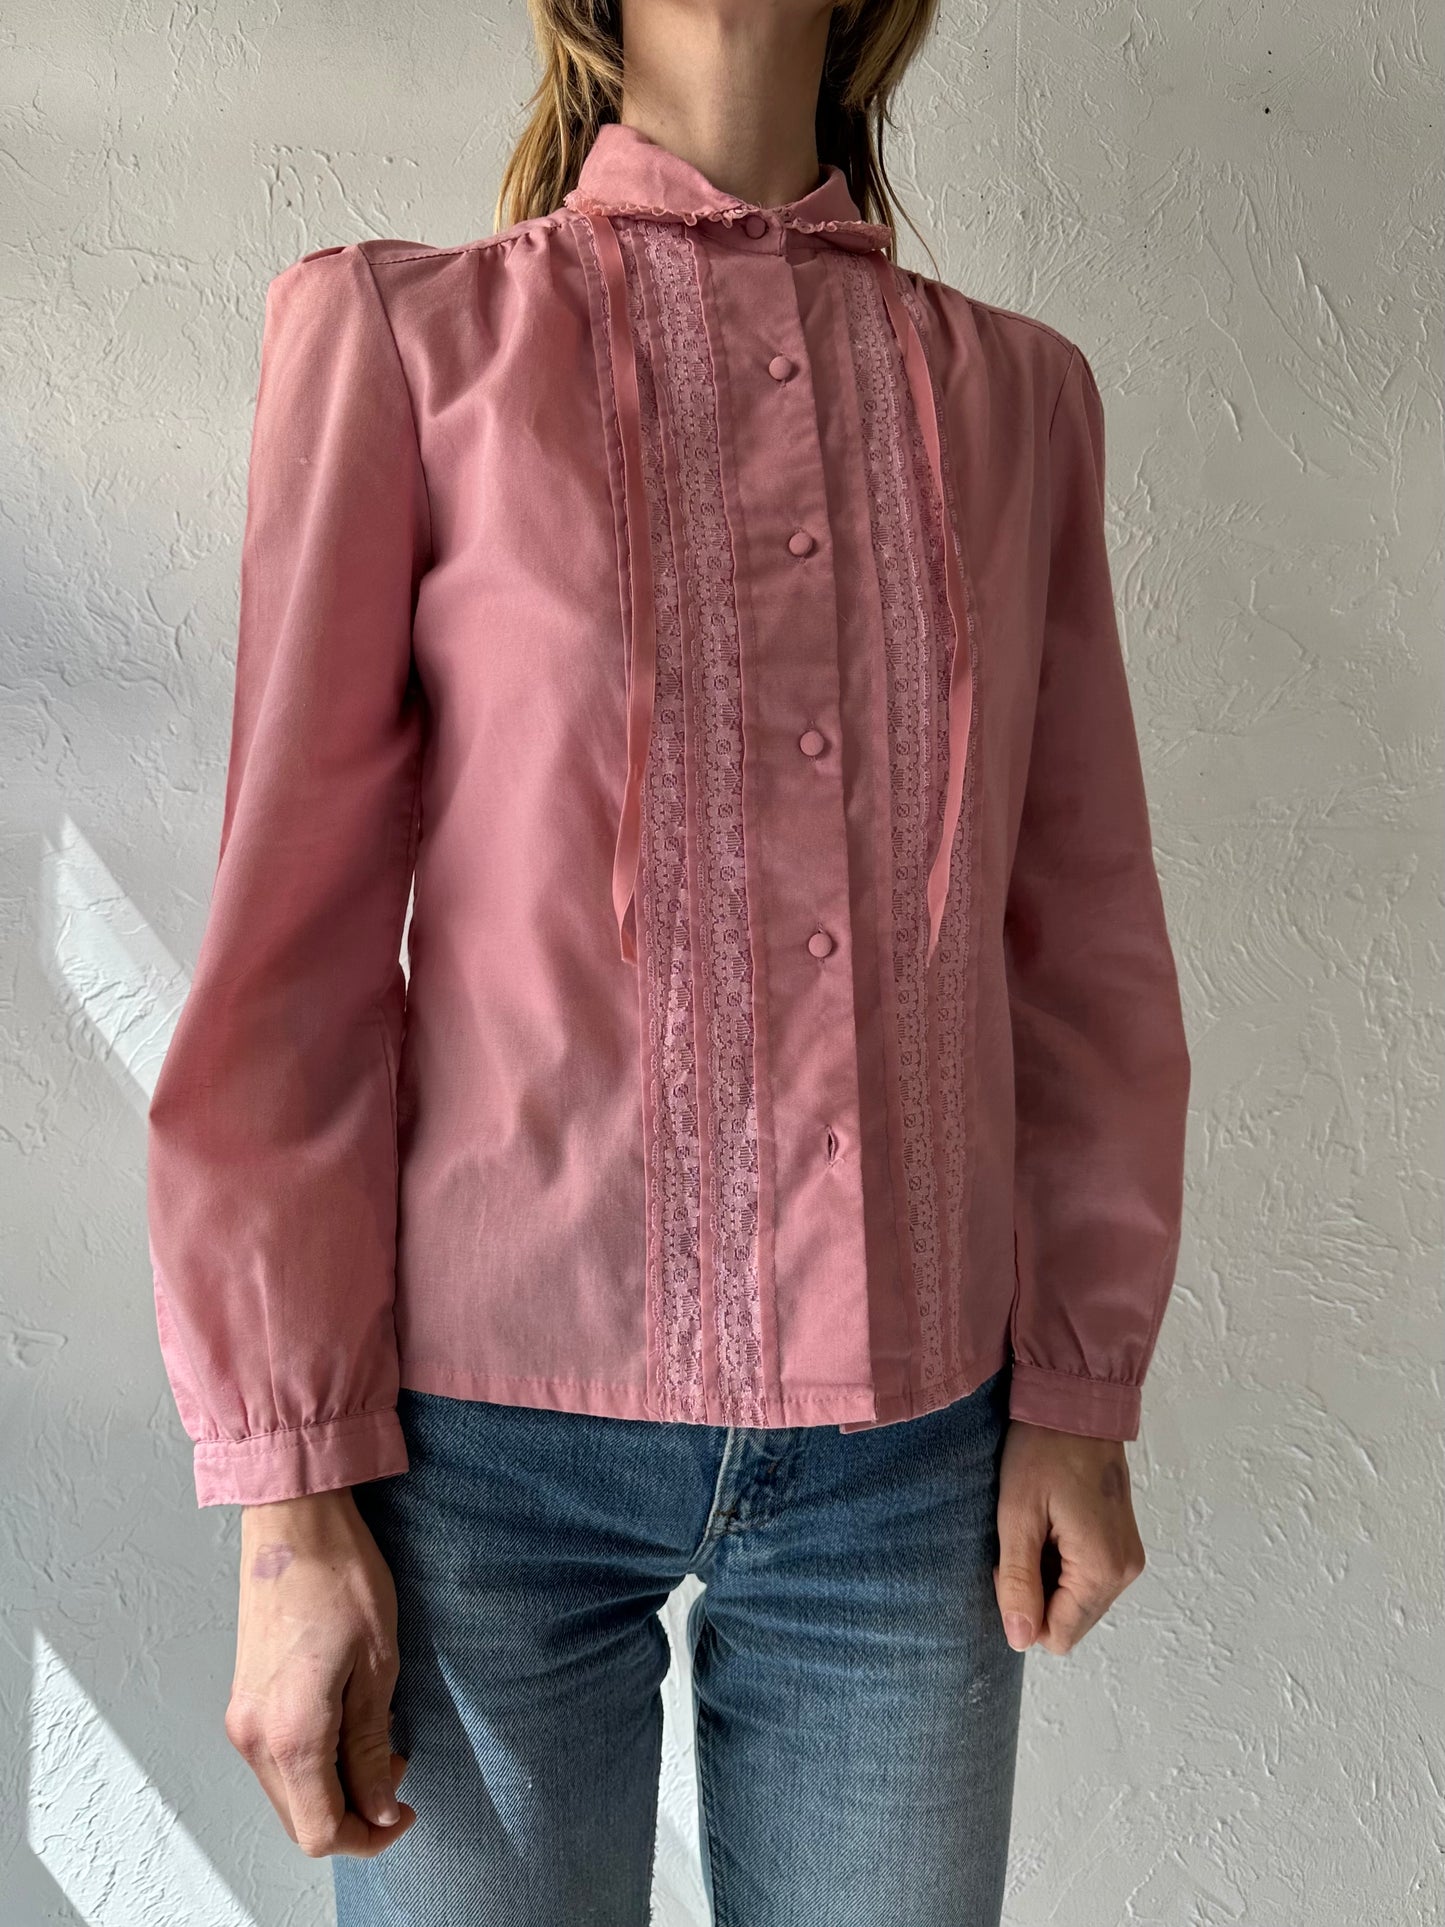 80s 'Chablis' Pink Button Up Western Blouse / Medium